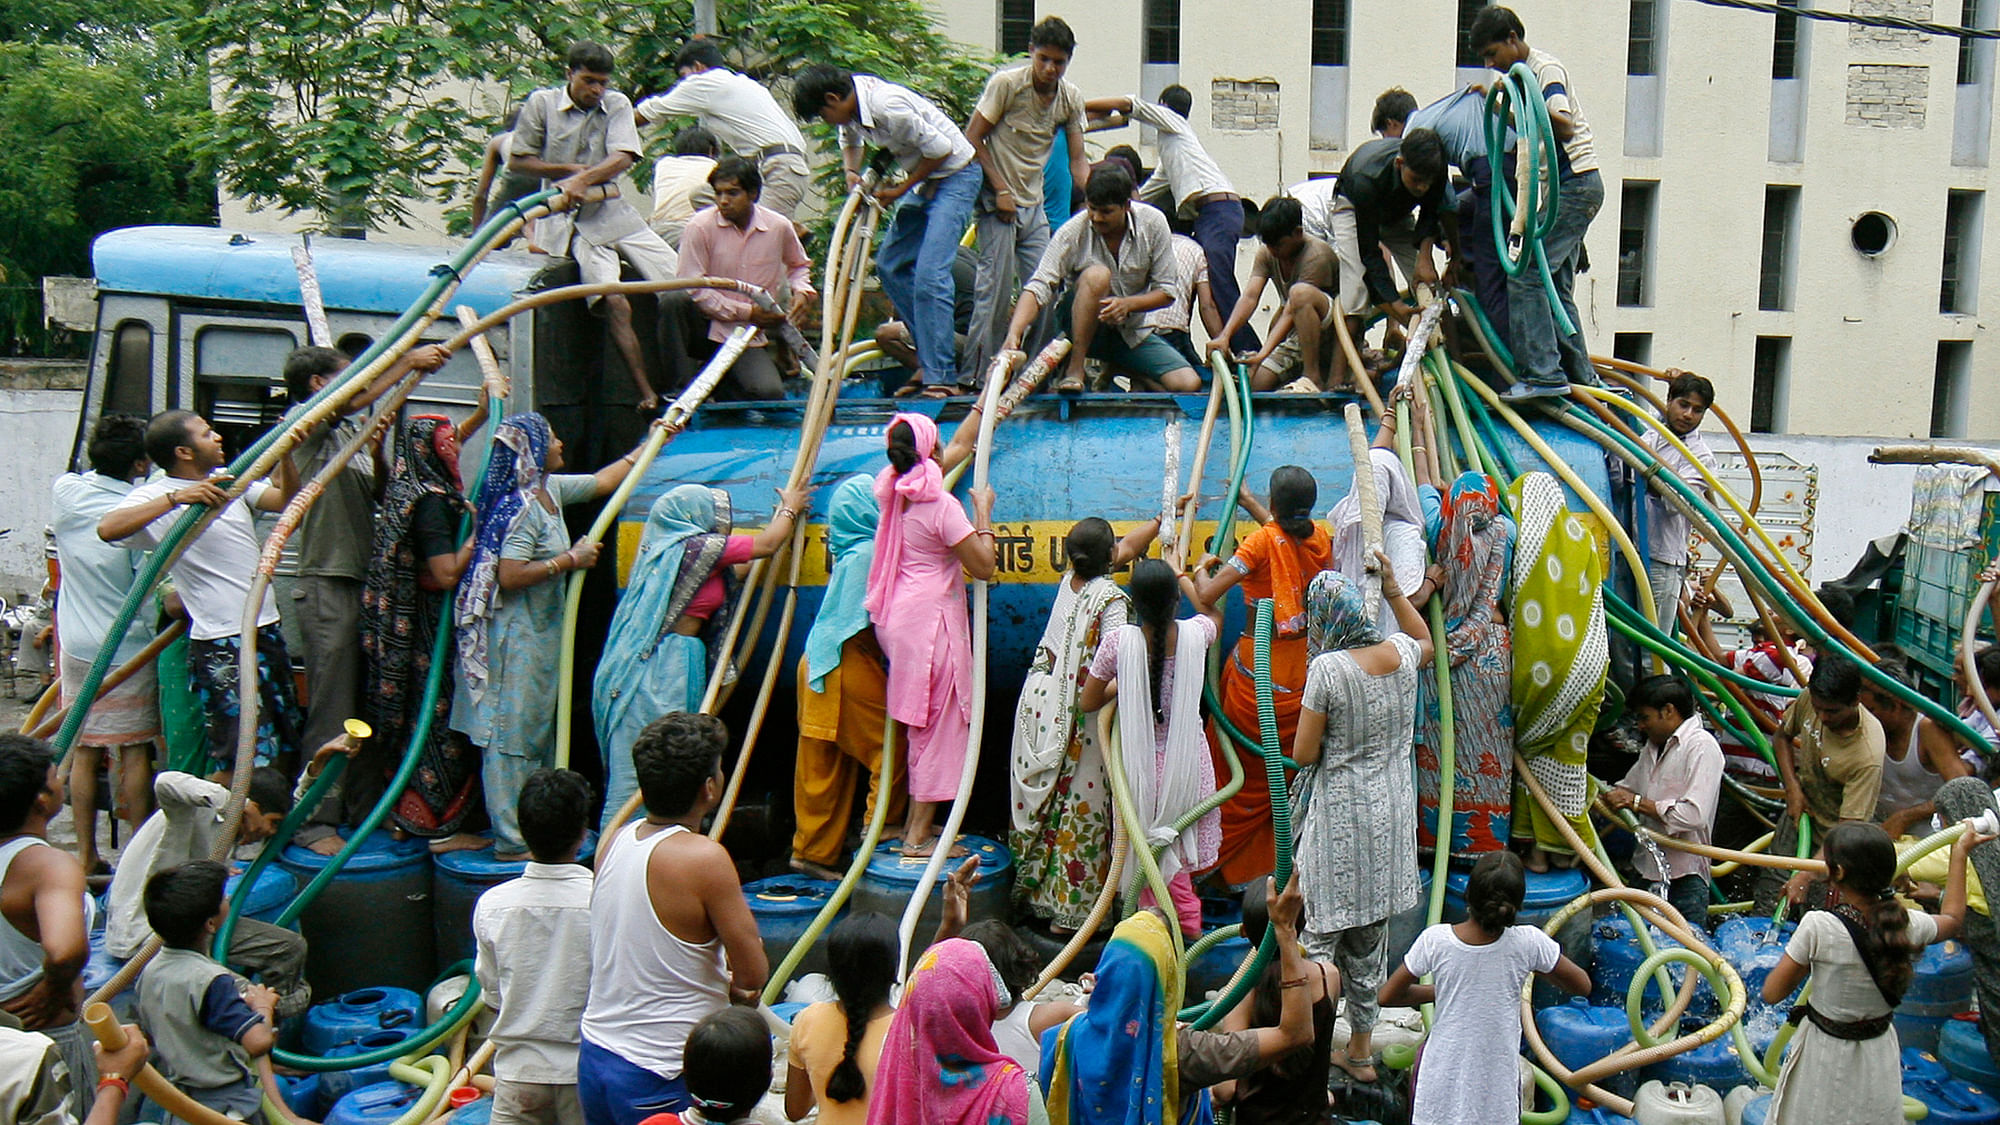 Residents of a Delhi colony crowd around a water tanker provided by Delhi Jal (water) Board to fill their containers. (Photo: Reuters)<!--EndFragment-->